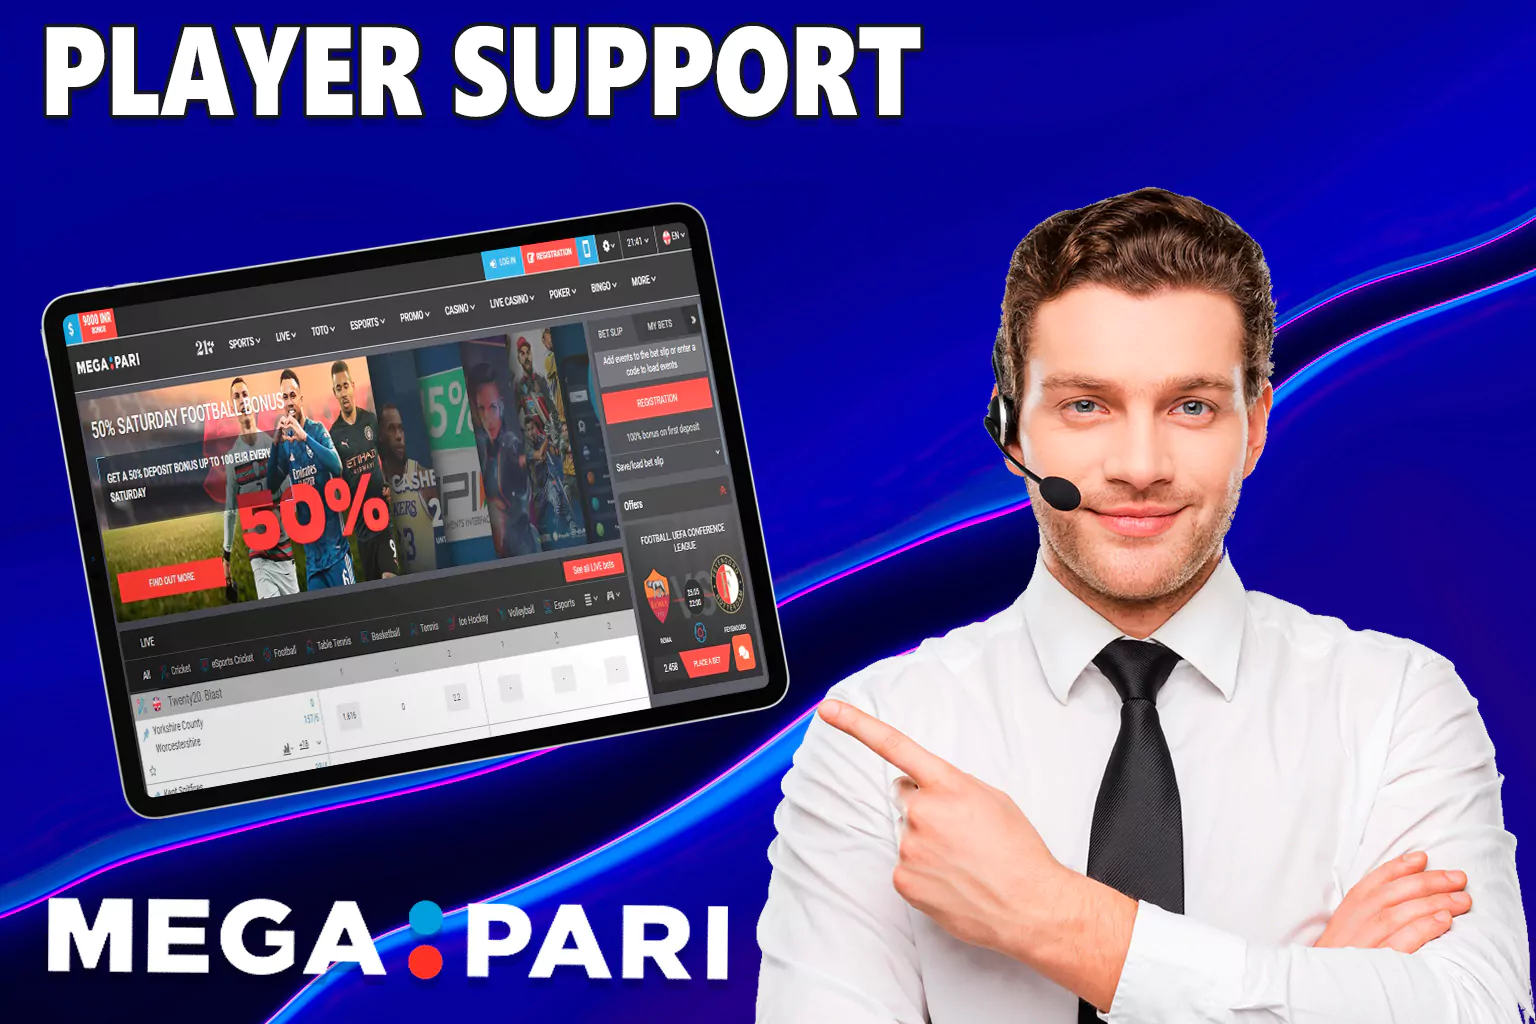 In case of problems, Mega Pari support will help, answer your questions 24/7.